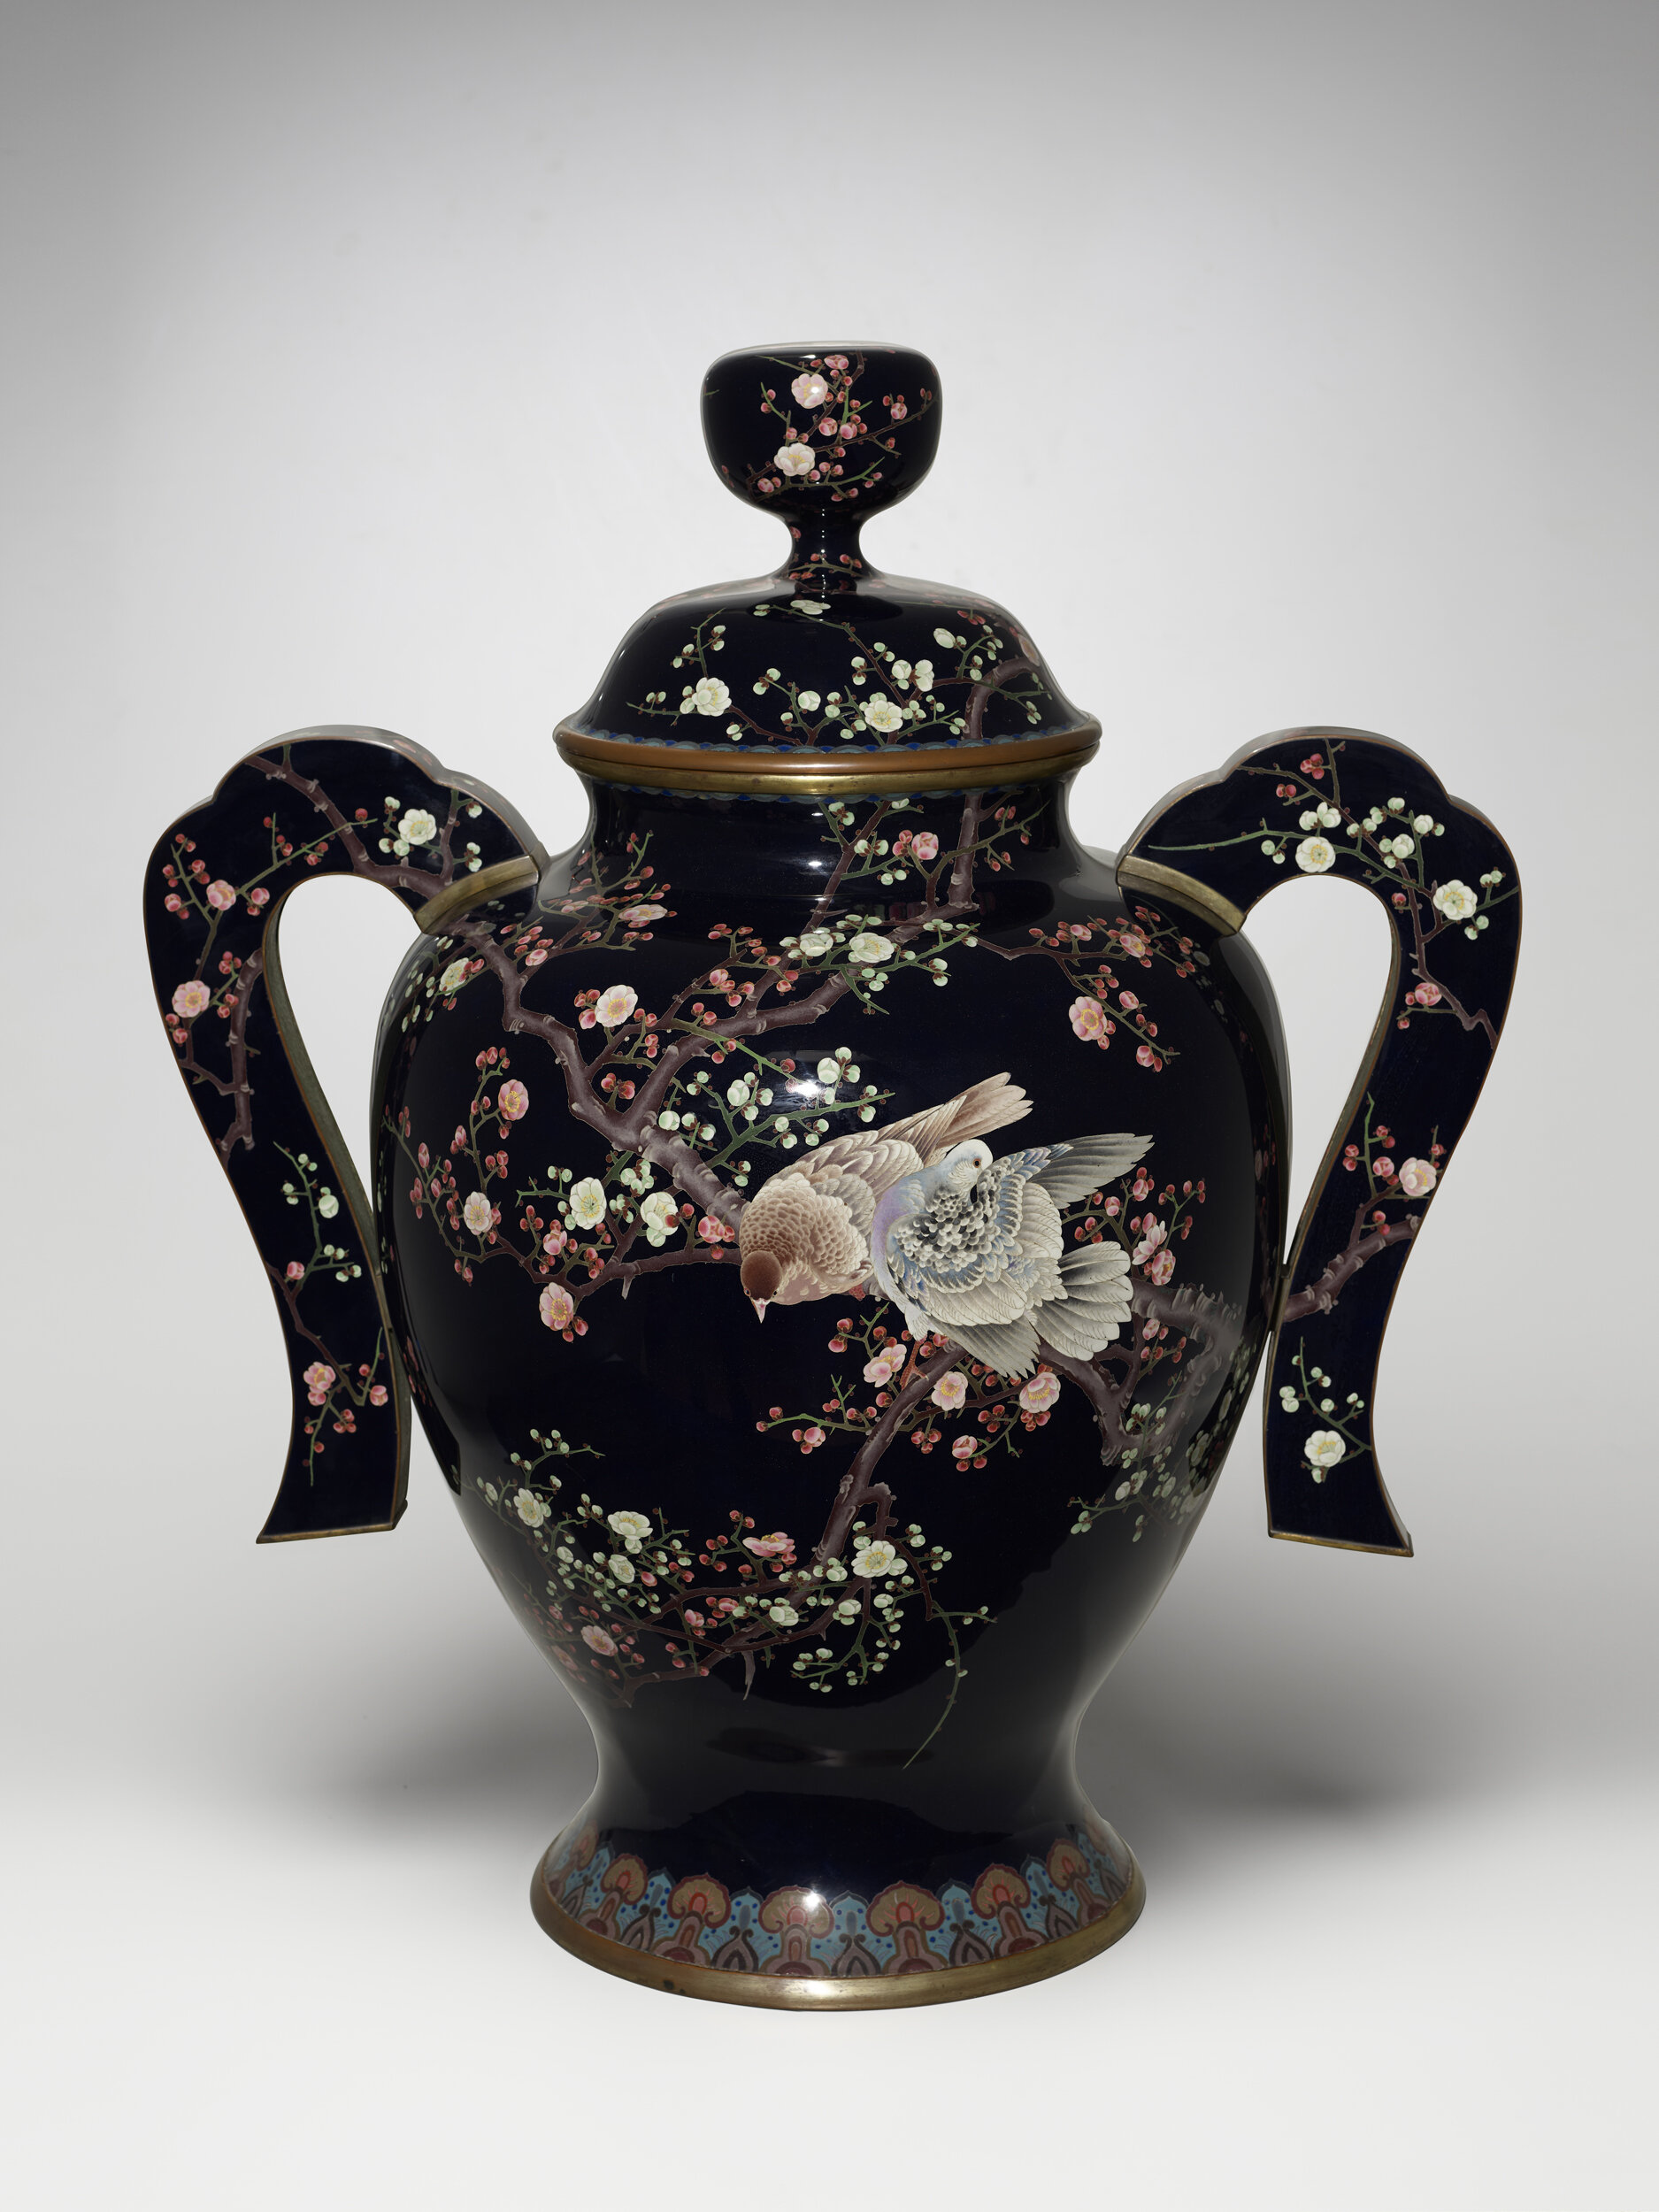  Japan, unknown artist (Japanese), Cloisonné urn with birds and plum blossom design, ca. 1895/1905, Cloisonné enamel with copper, brass, and silver, display: 35 1/2 in x 30 3/8 in x 21 5/16 in, Gift of Renee Pezzi. Portland Art Museum, Portland, Oreg